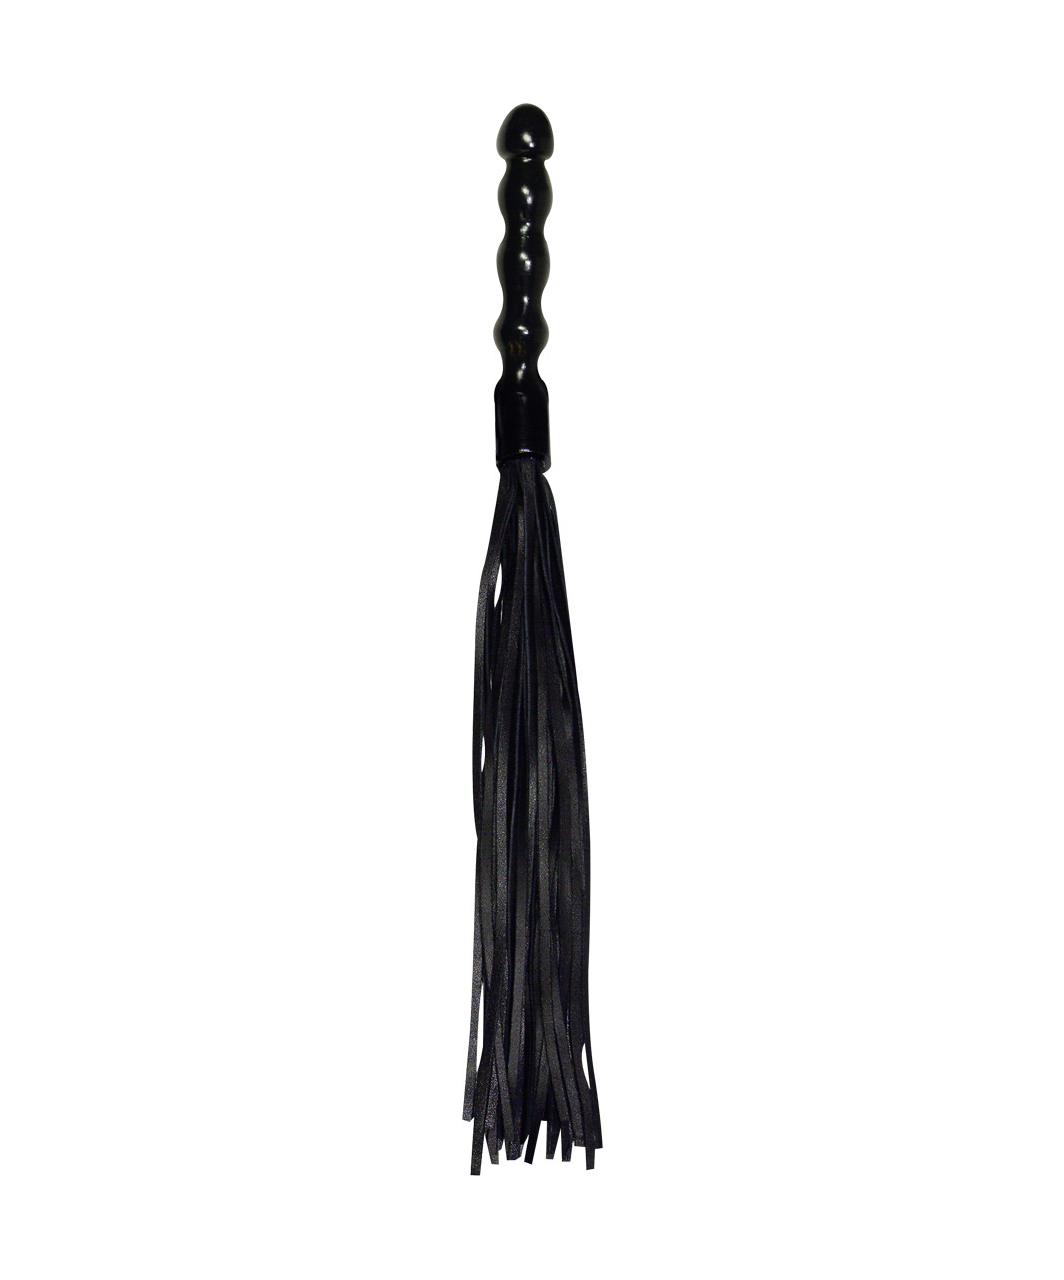 Zado black leather whip with wooden handle